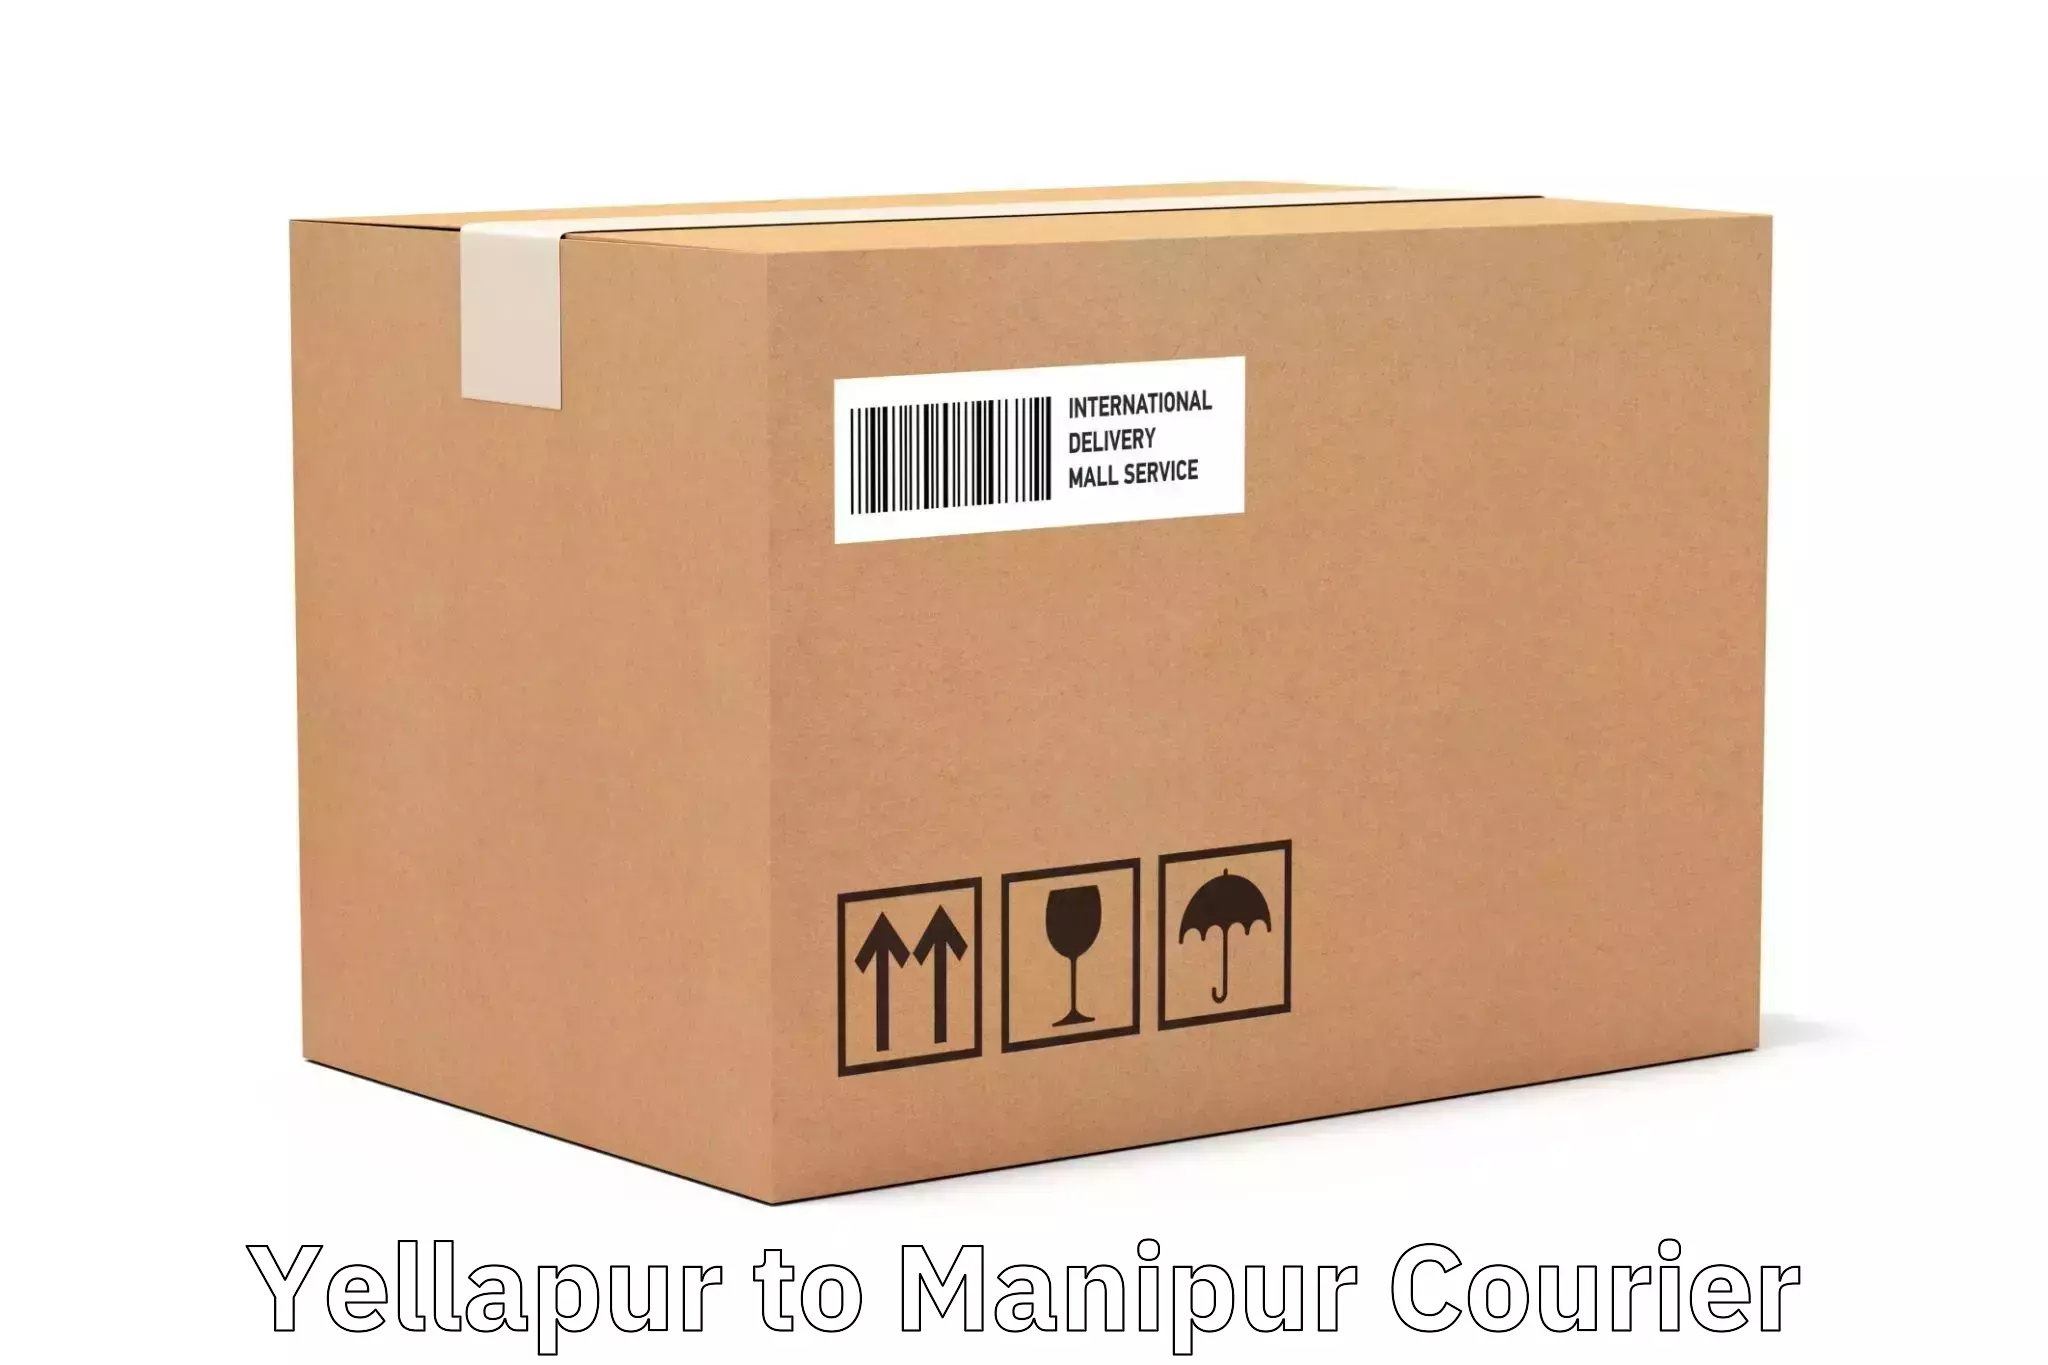 Customer-oriented courier services Yellapur to Manipur